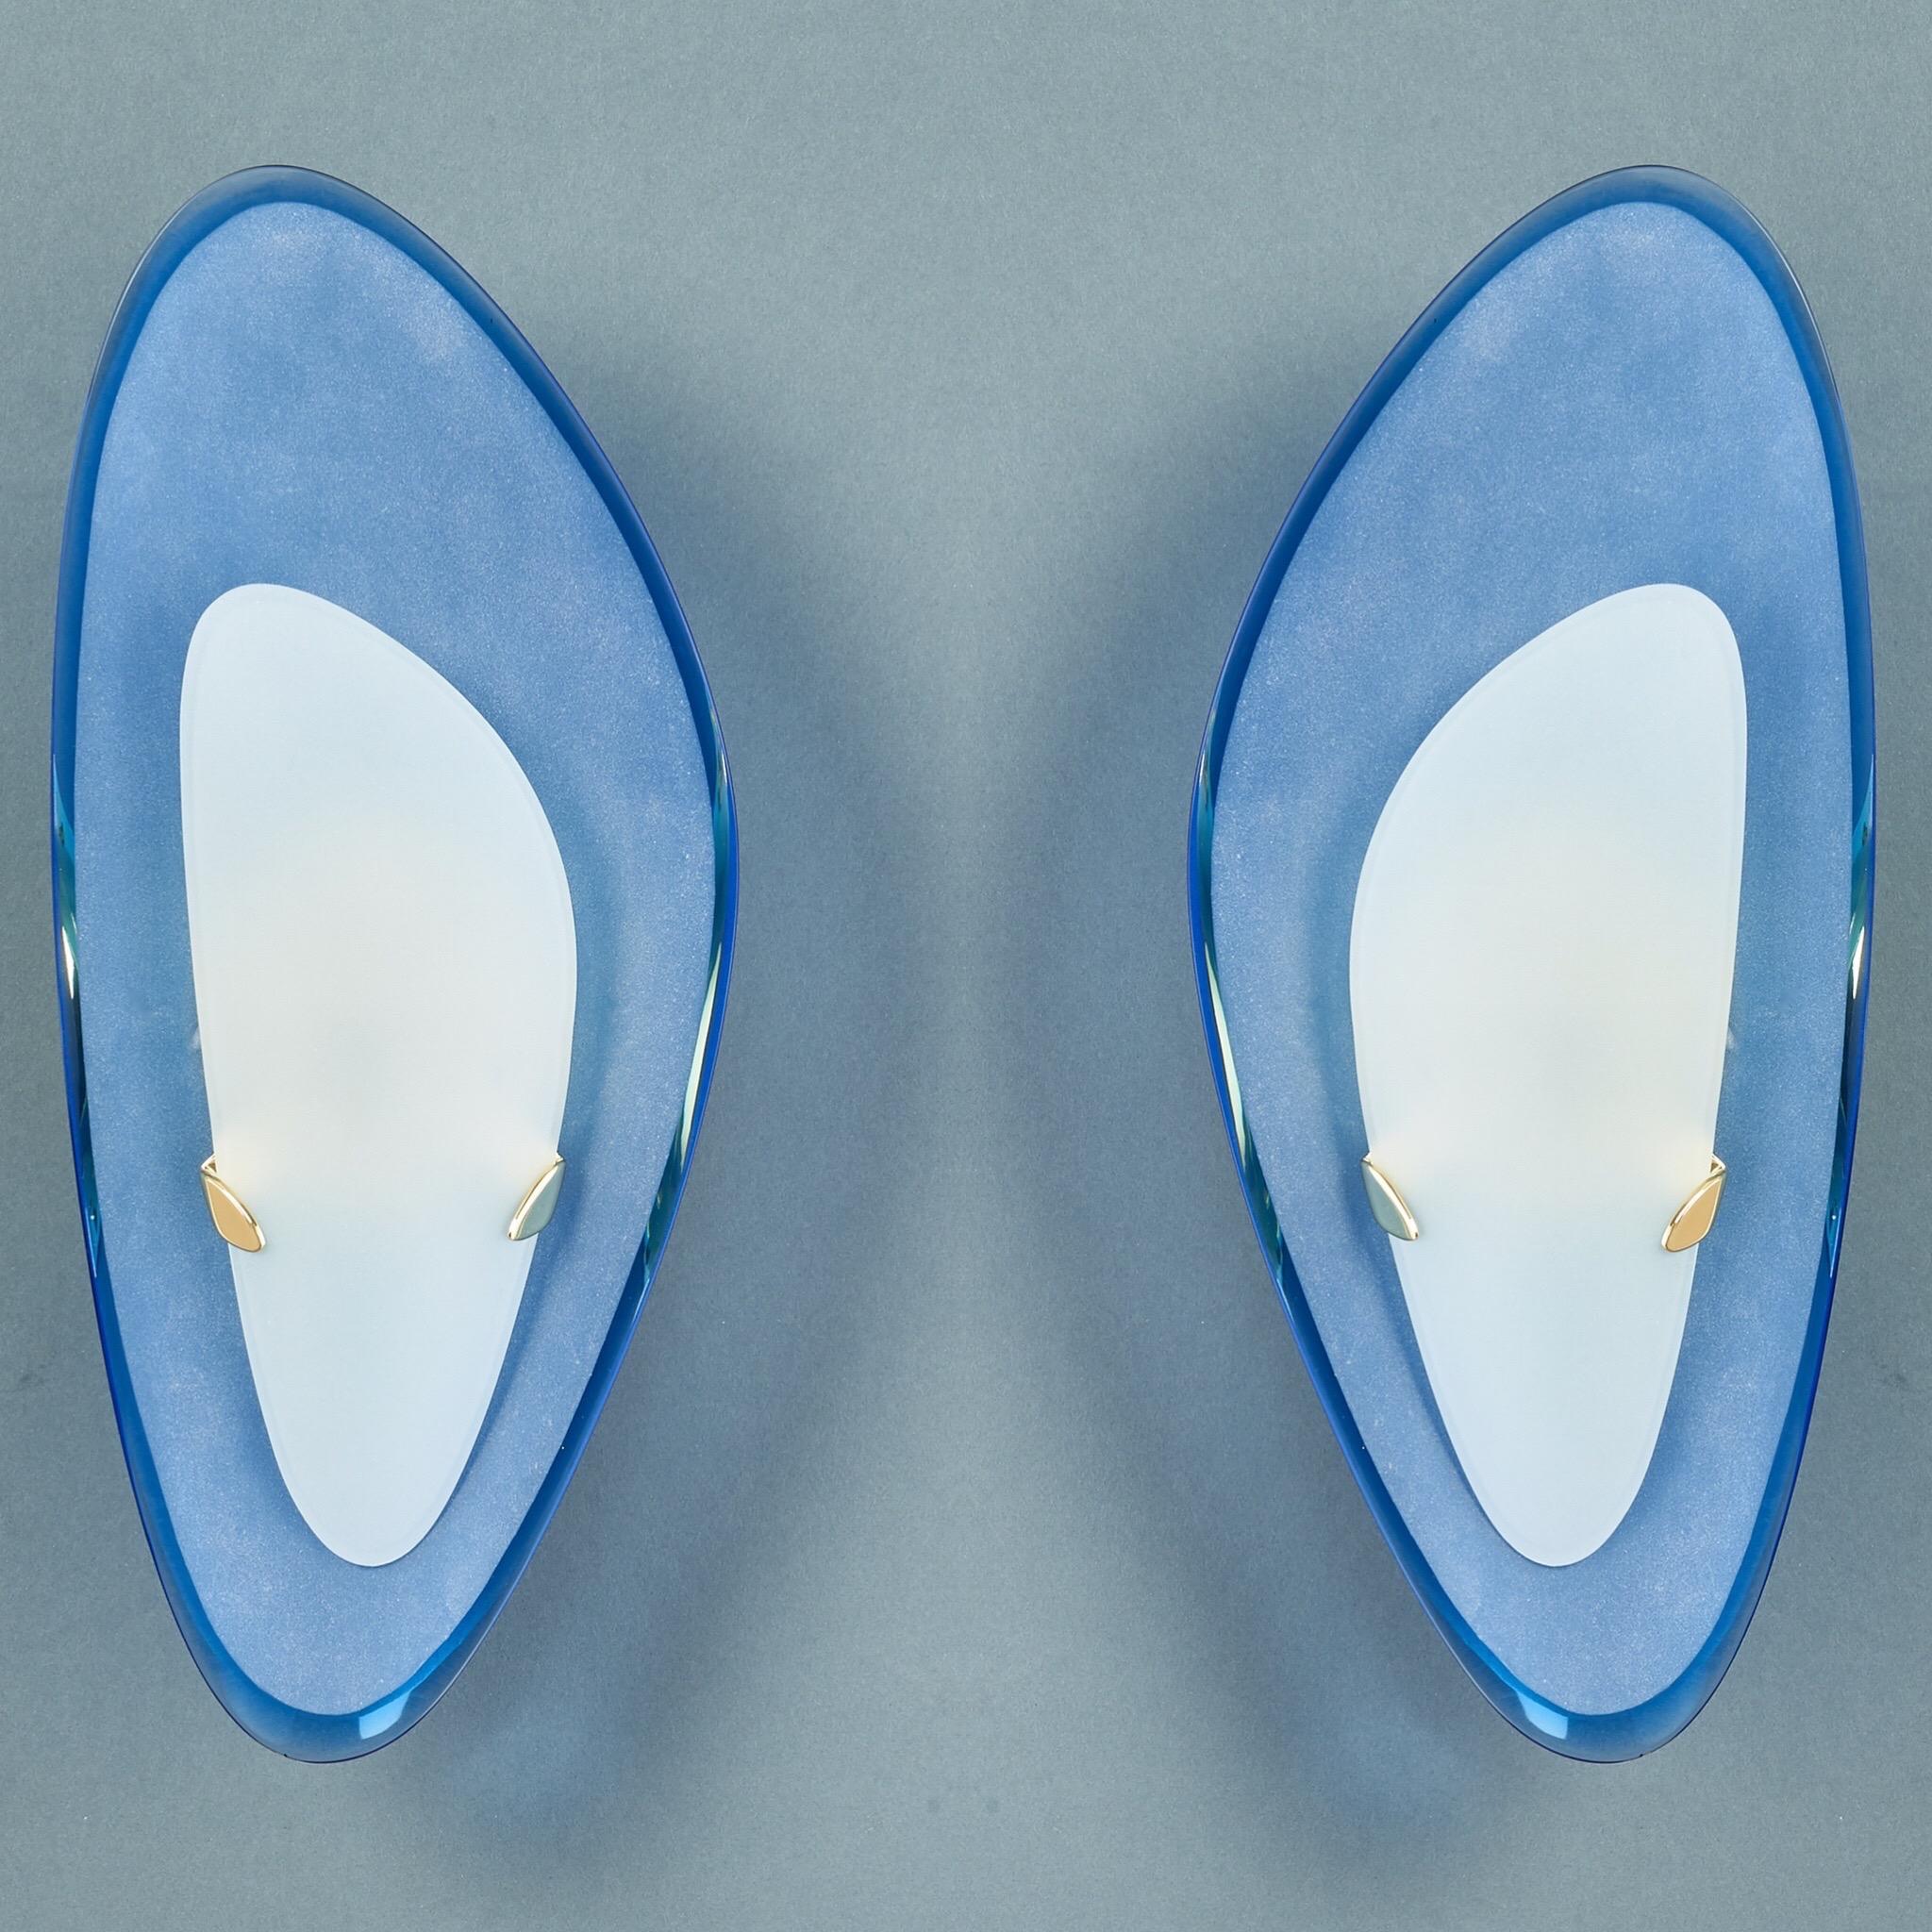 Max Ingrand (1908-1969) for Fontana Arte

A rare and exceptional pair of asymmetric sconces by Max Ingrand for Fontana Arte. With curved and beveled frosted glass shields, mounted by angular brass brackets against notable curved blue beveled